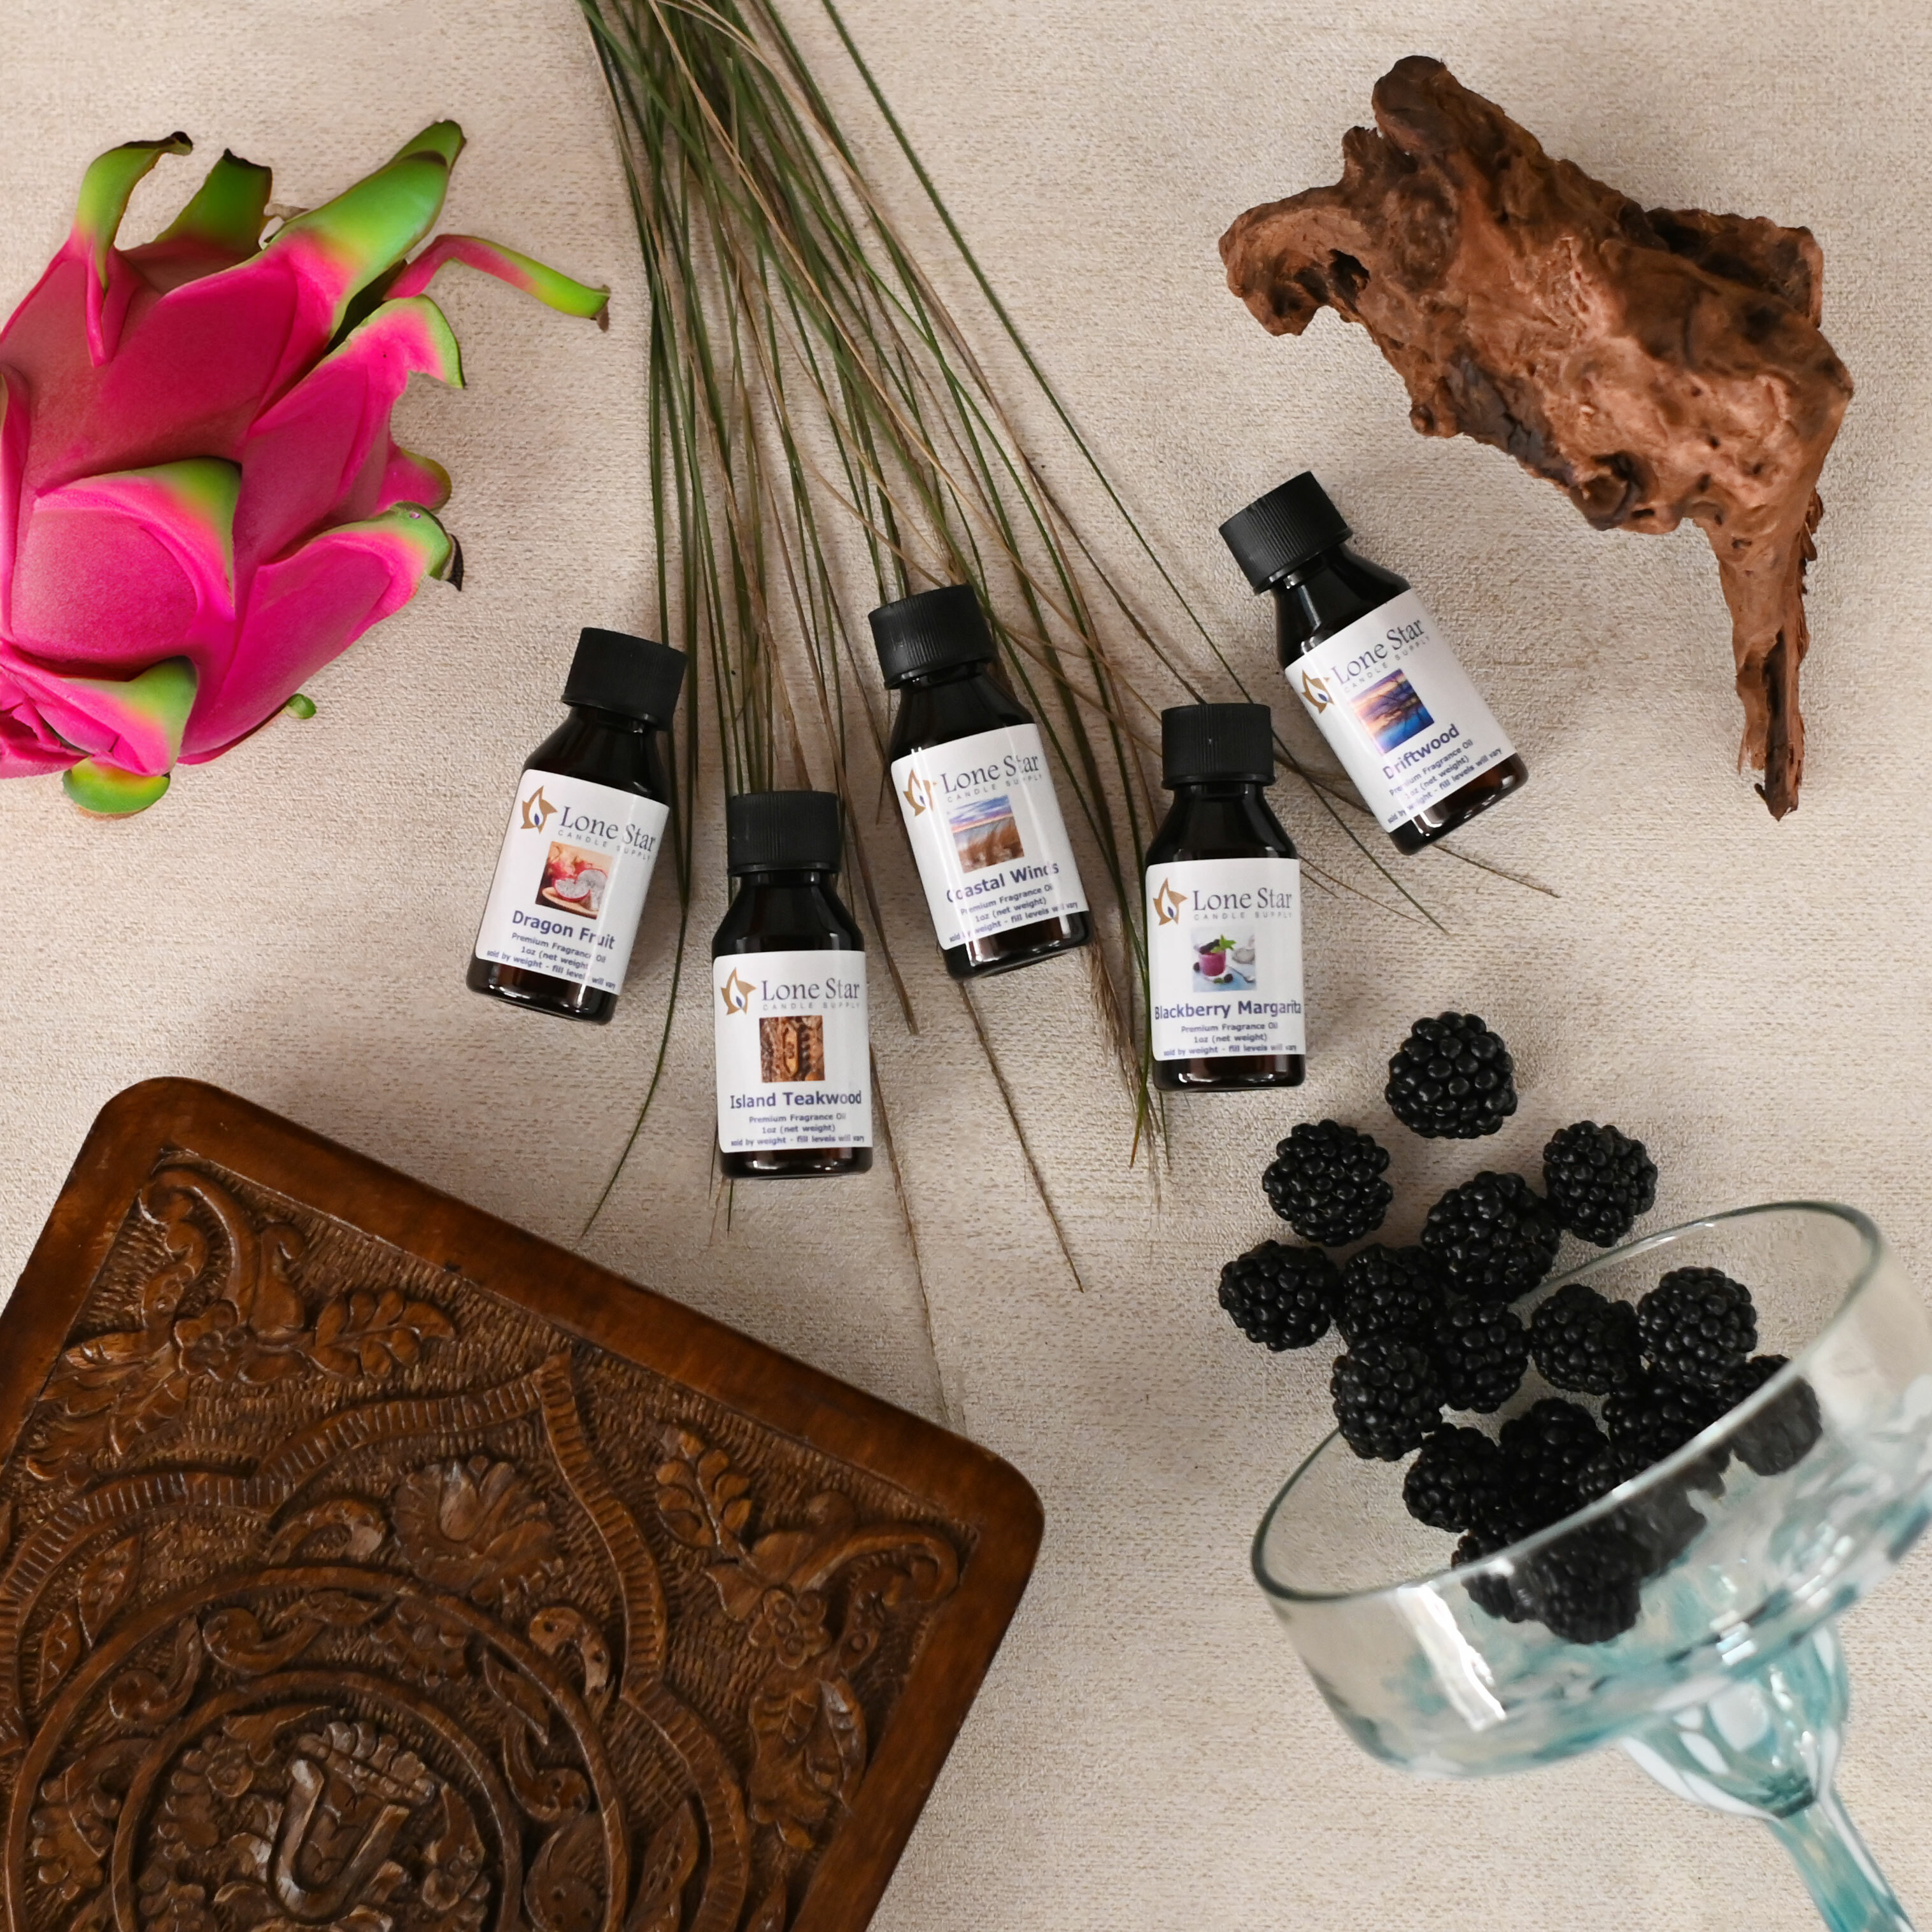 A flat lay image featuring bottles of Lone Star fragrance oils surrounded by a dragon fruit, blades of grass, a wooden carving, a piece of driftwood, and a glass filled with blackberries.